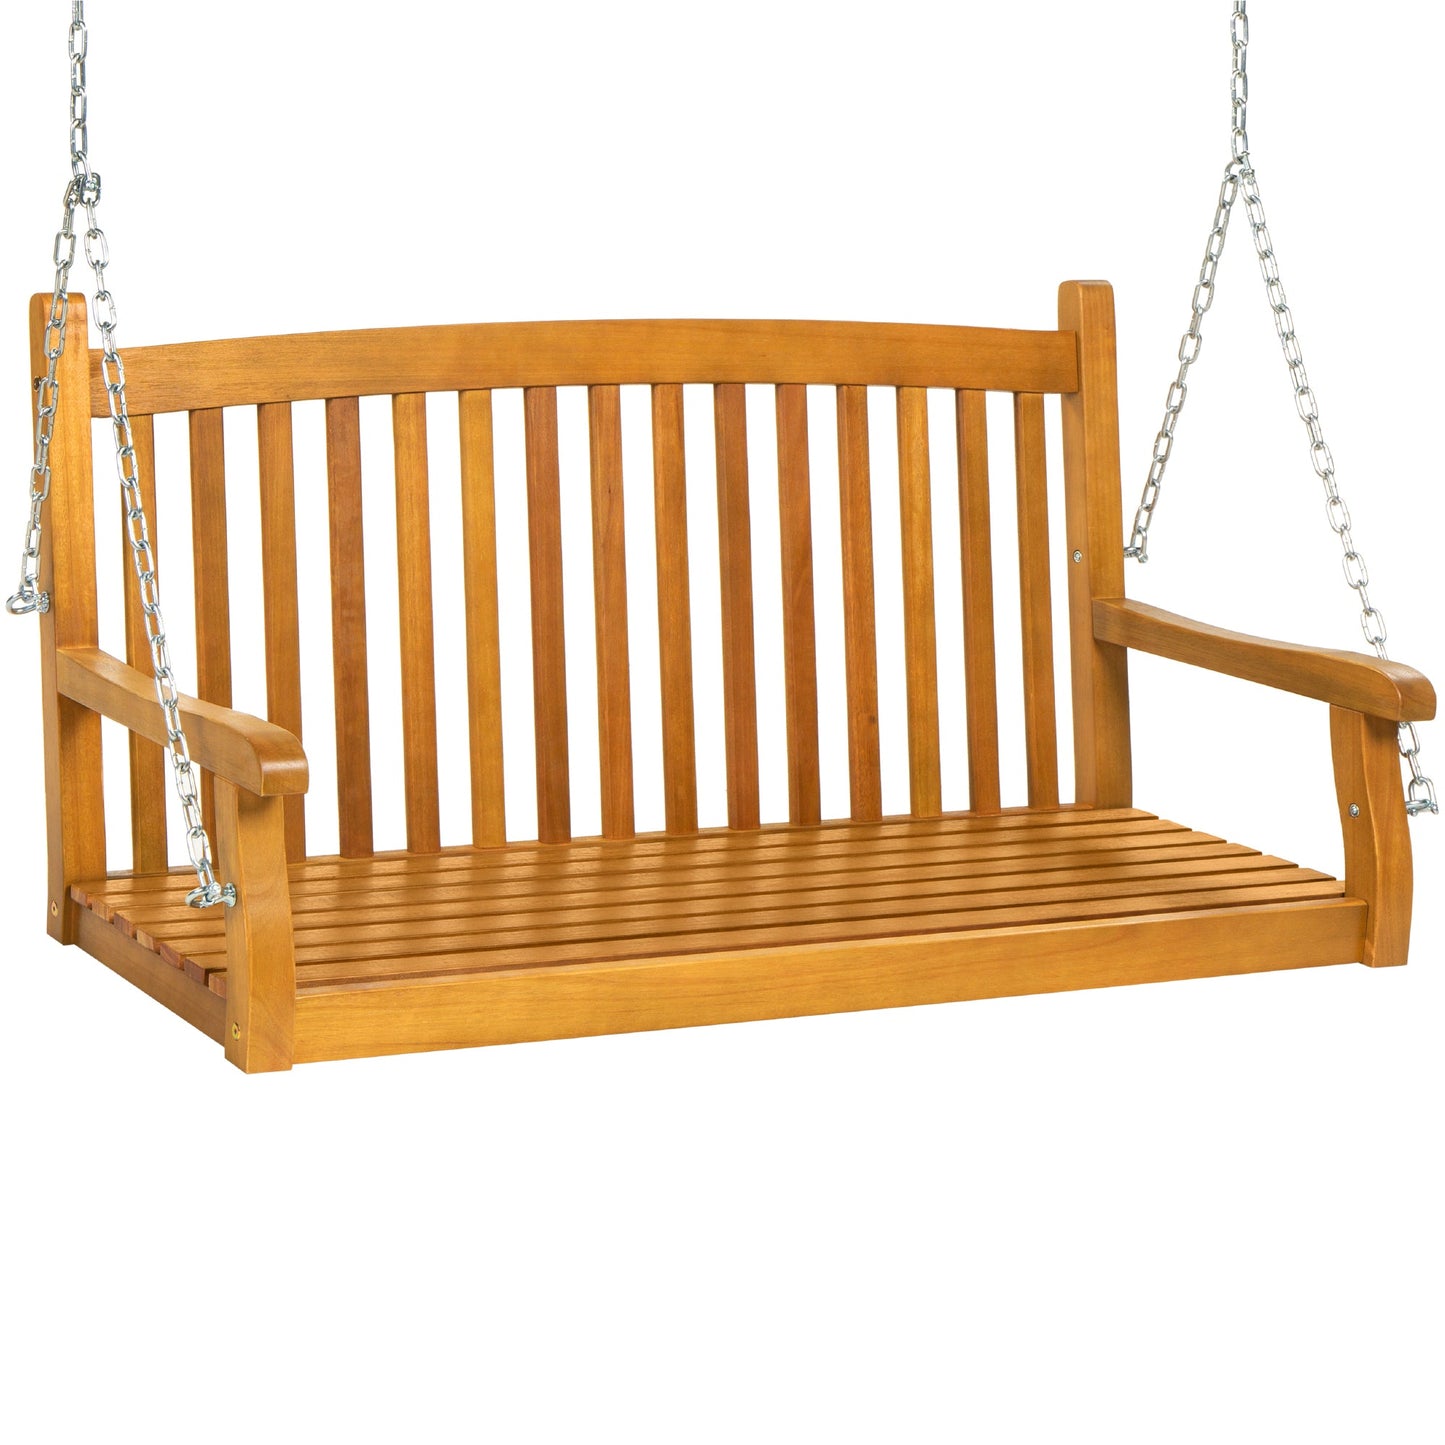 Wooden Curved Back Hanging Porch Swing Bench w/ Mounting Chains - 48in